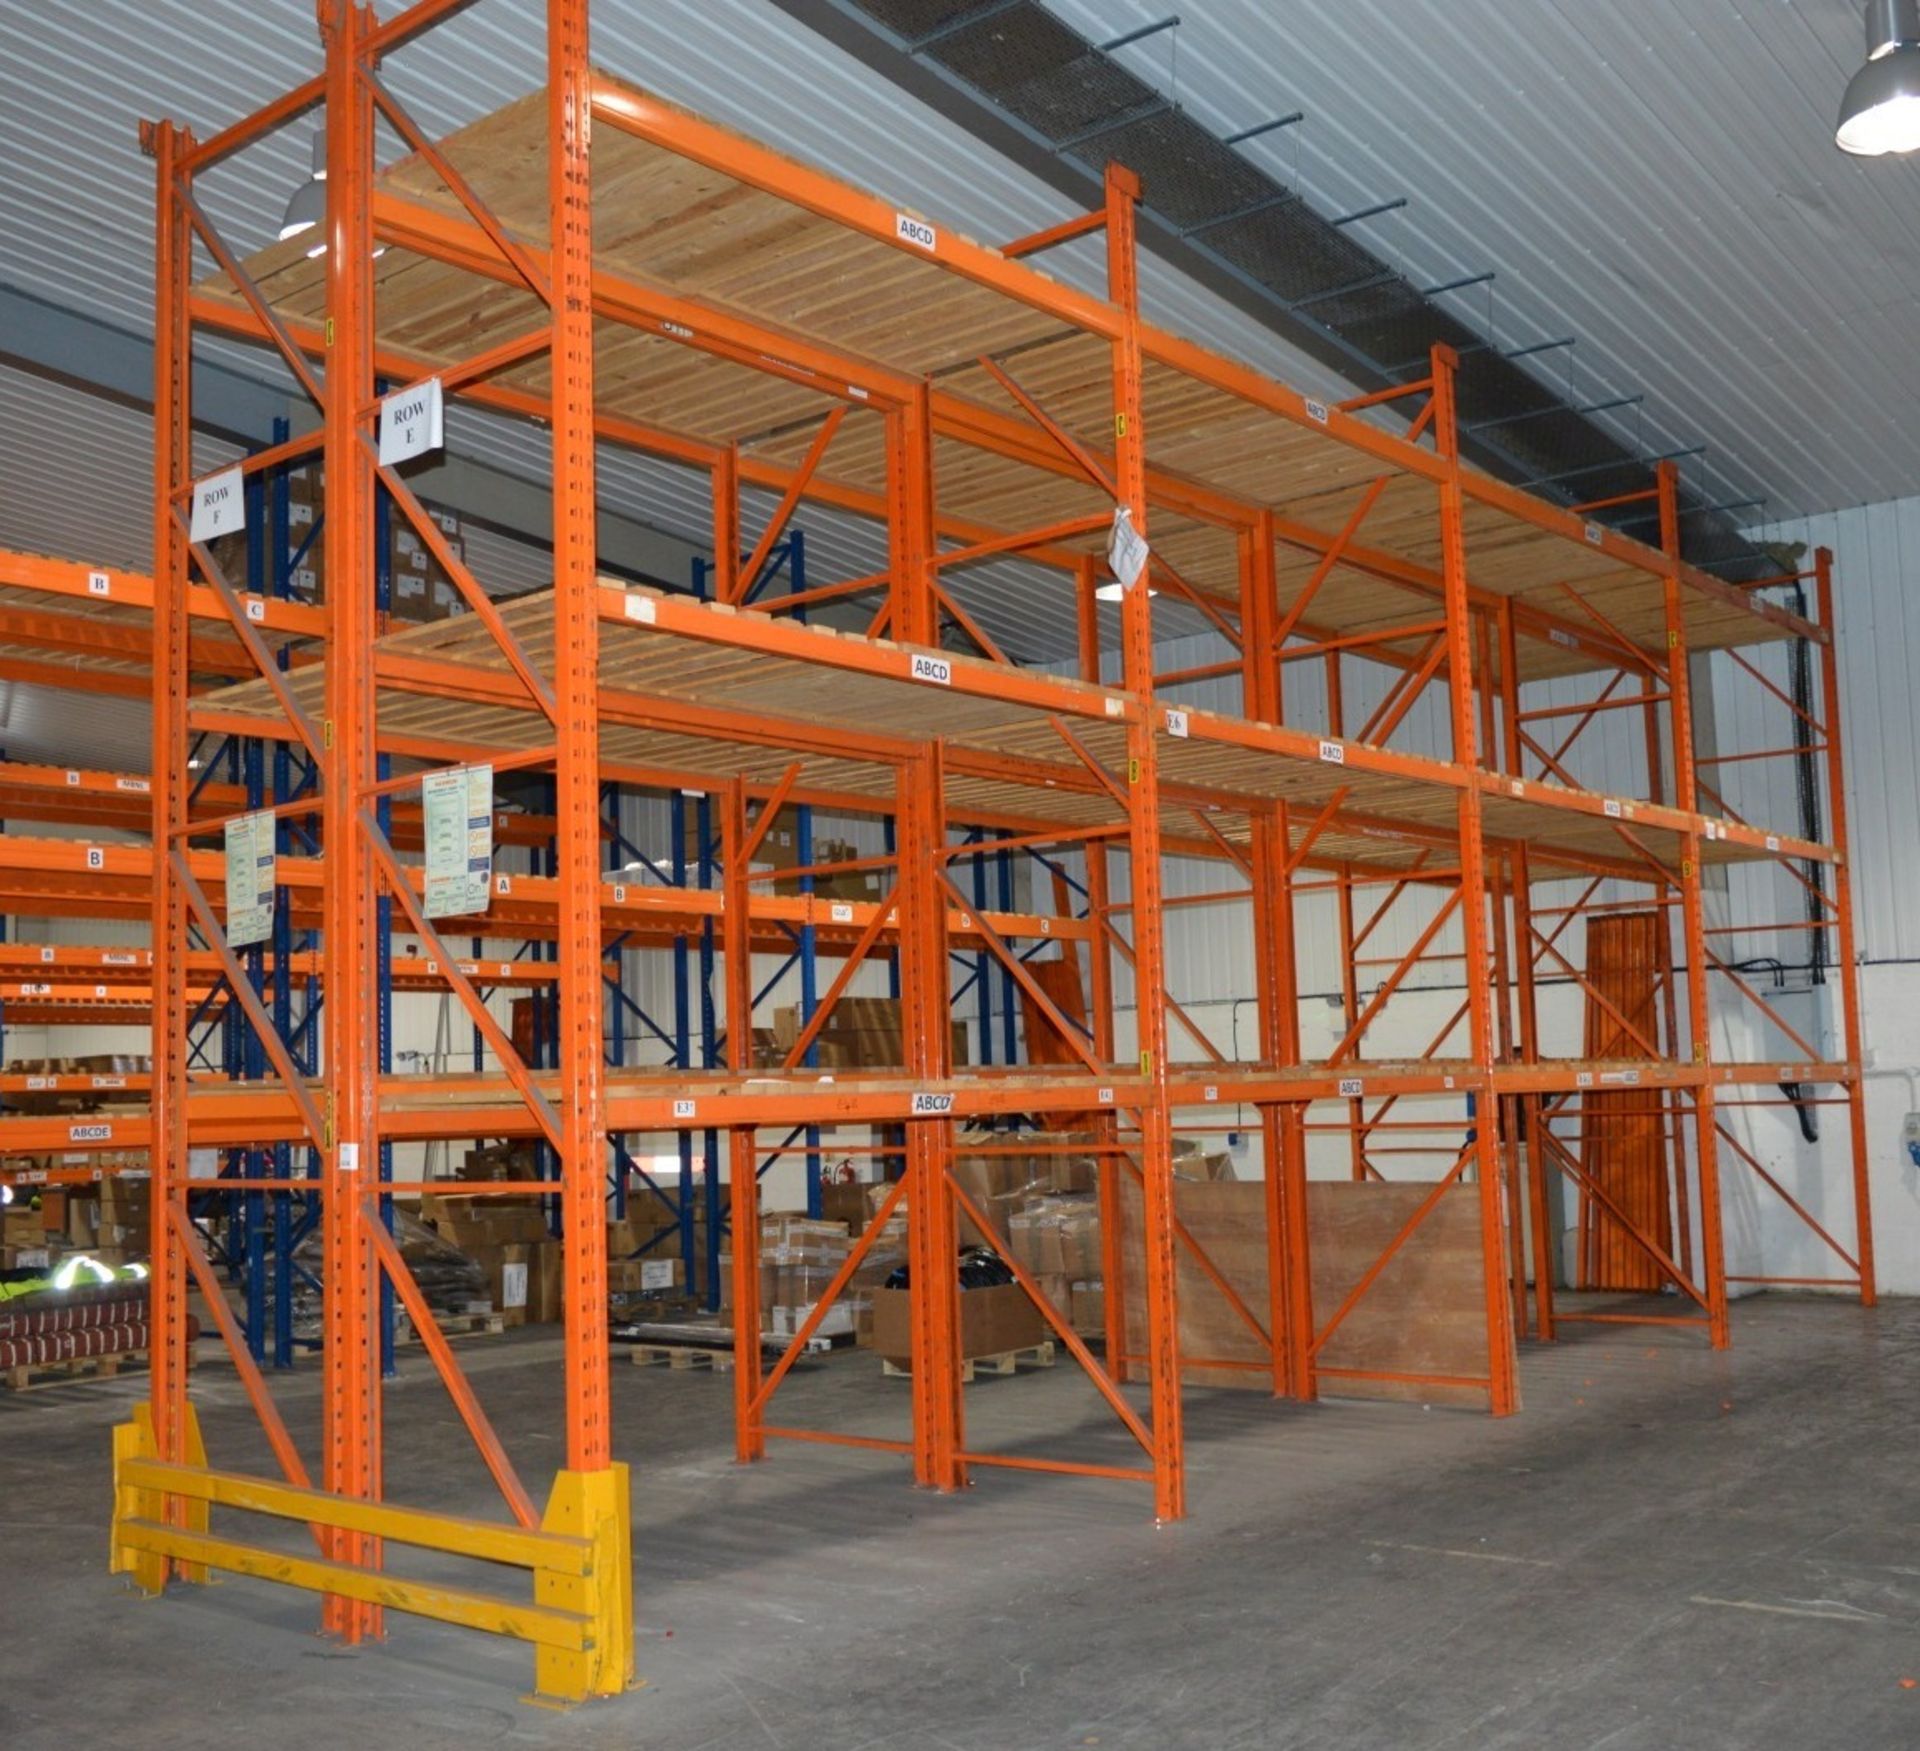 8 x Bays of Warehouse PALLET RACKING - Lot Includes 110 x Uprights, 56 x Crossbeams, 1 x - Image 7 of 9